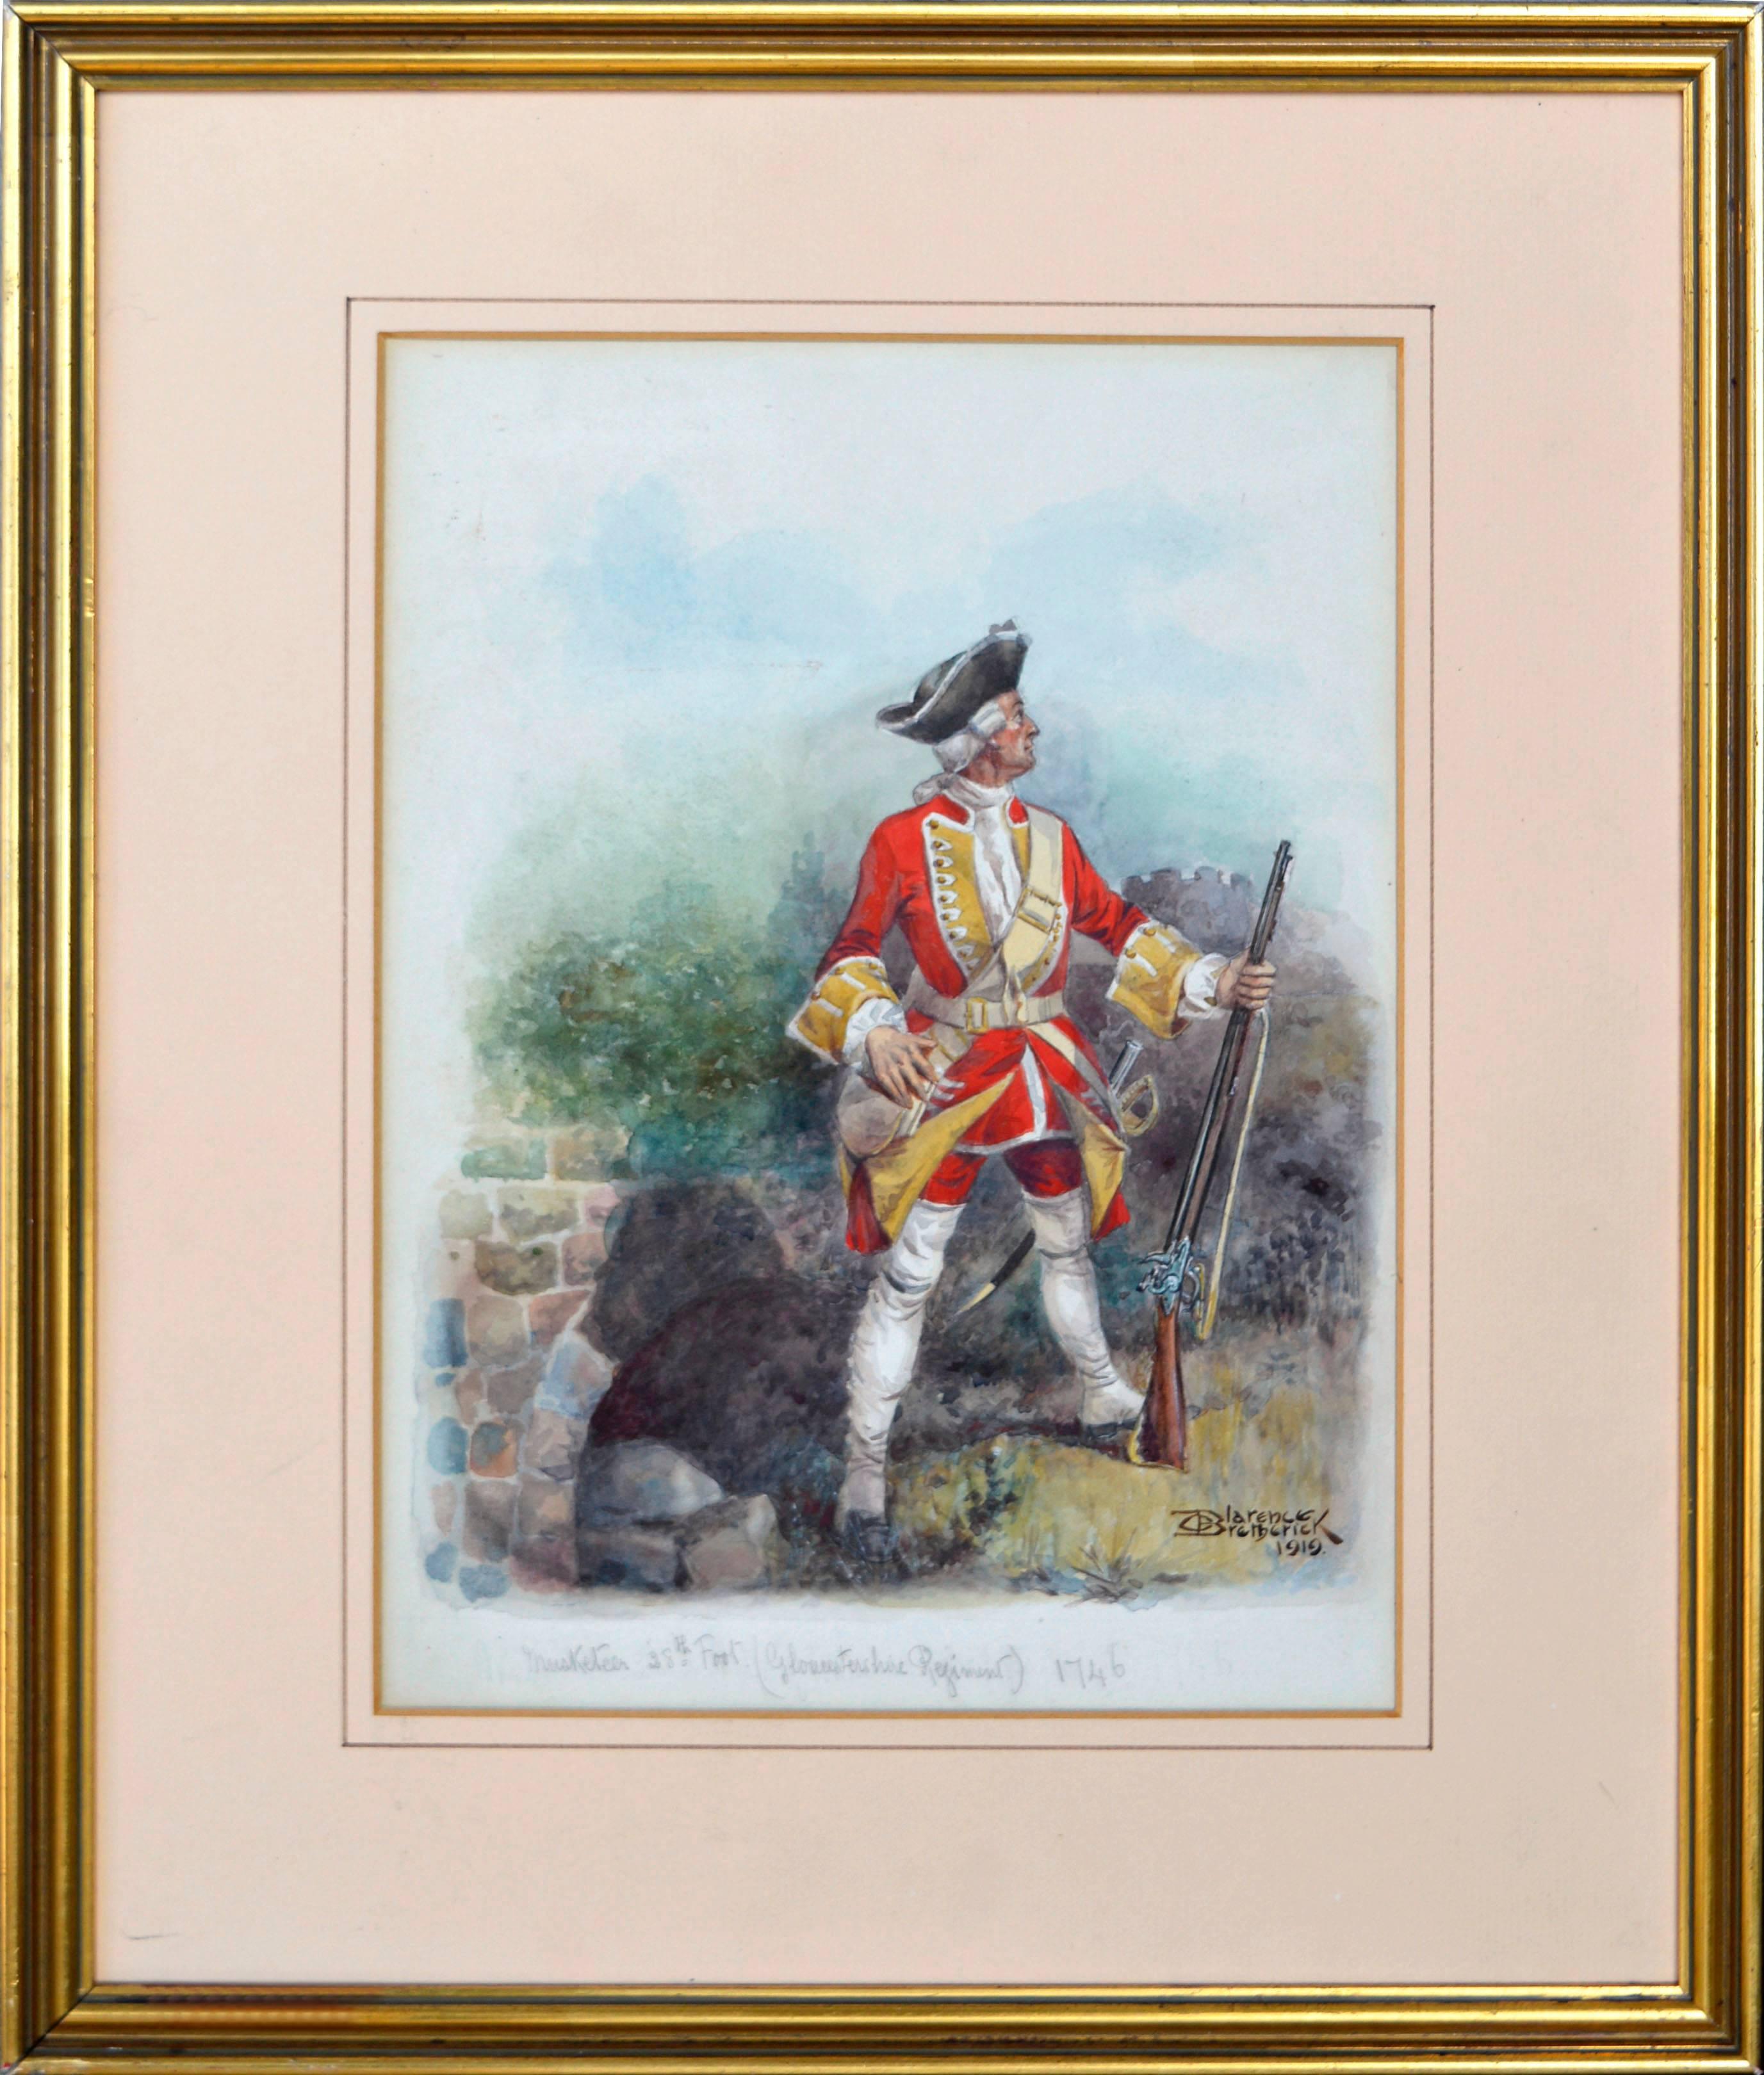 Musketeer 28th Foot (Gloucestershire Regiment) 1746 in Watercolor on Paper